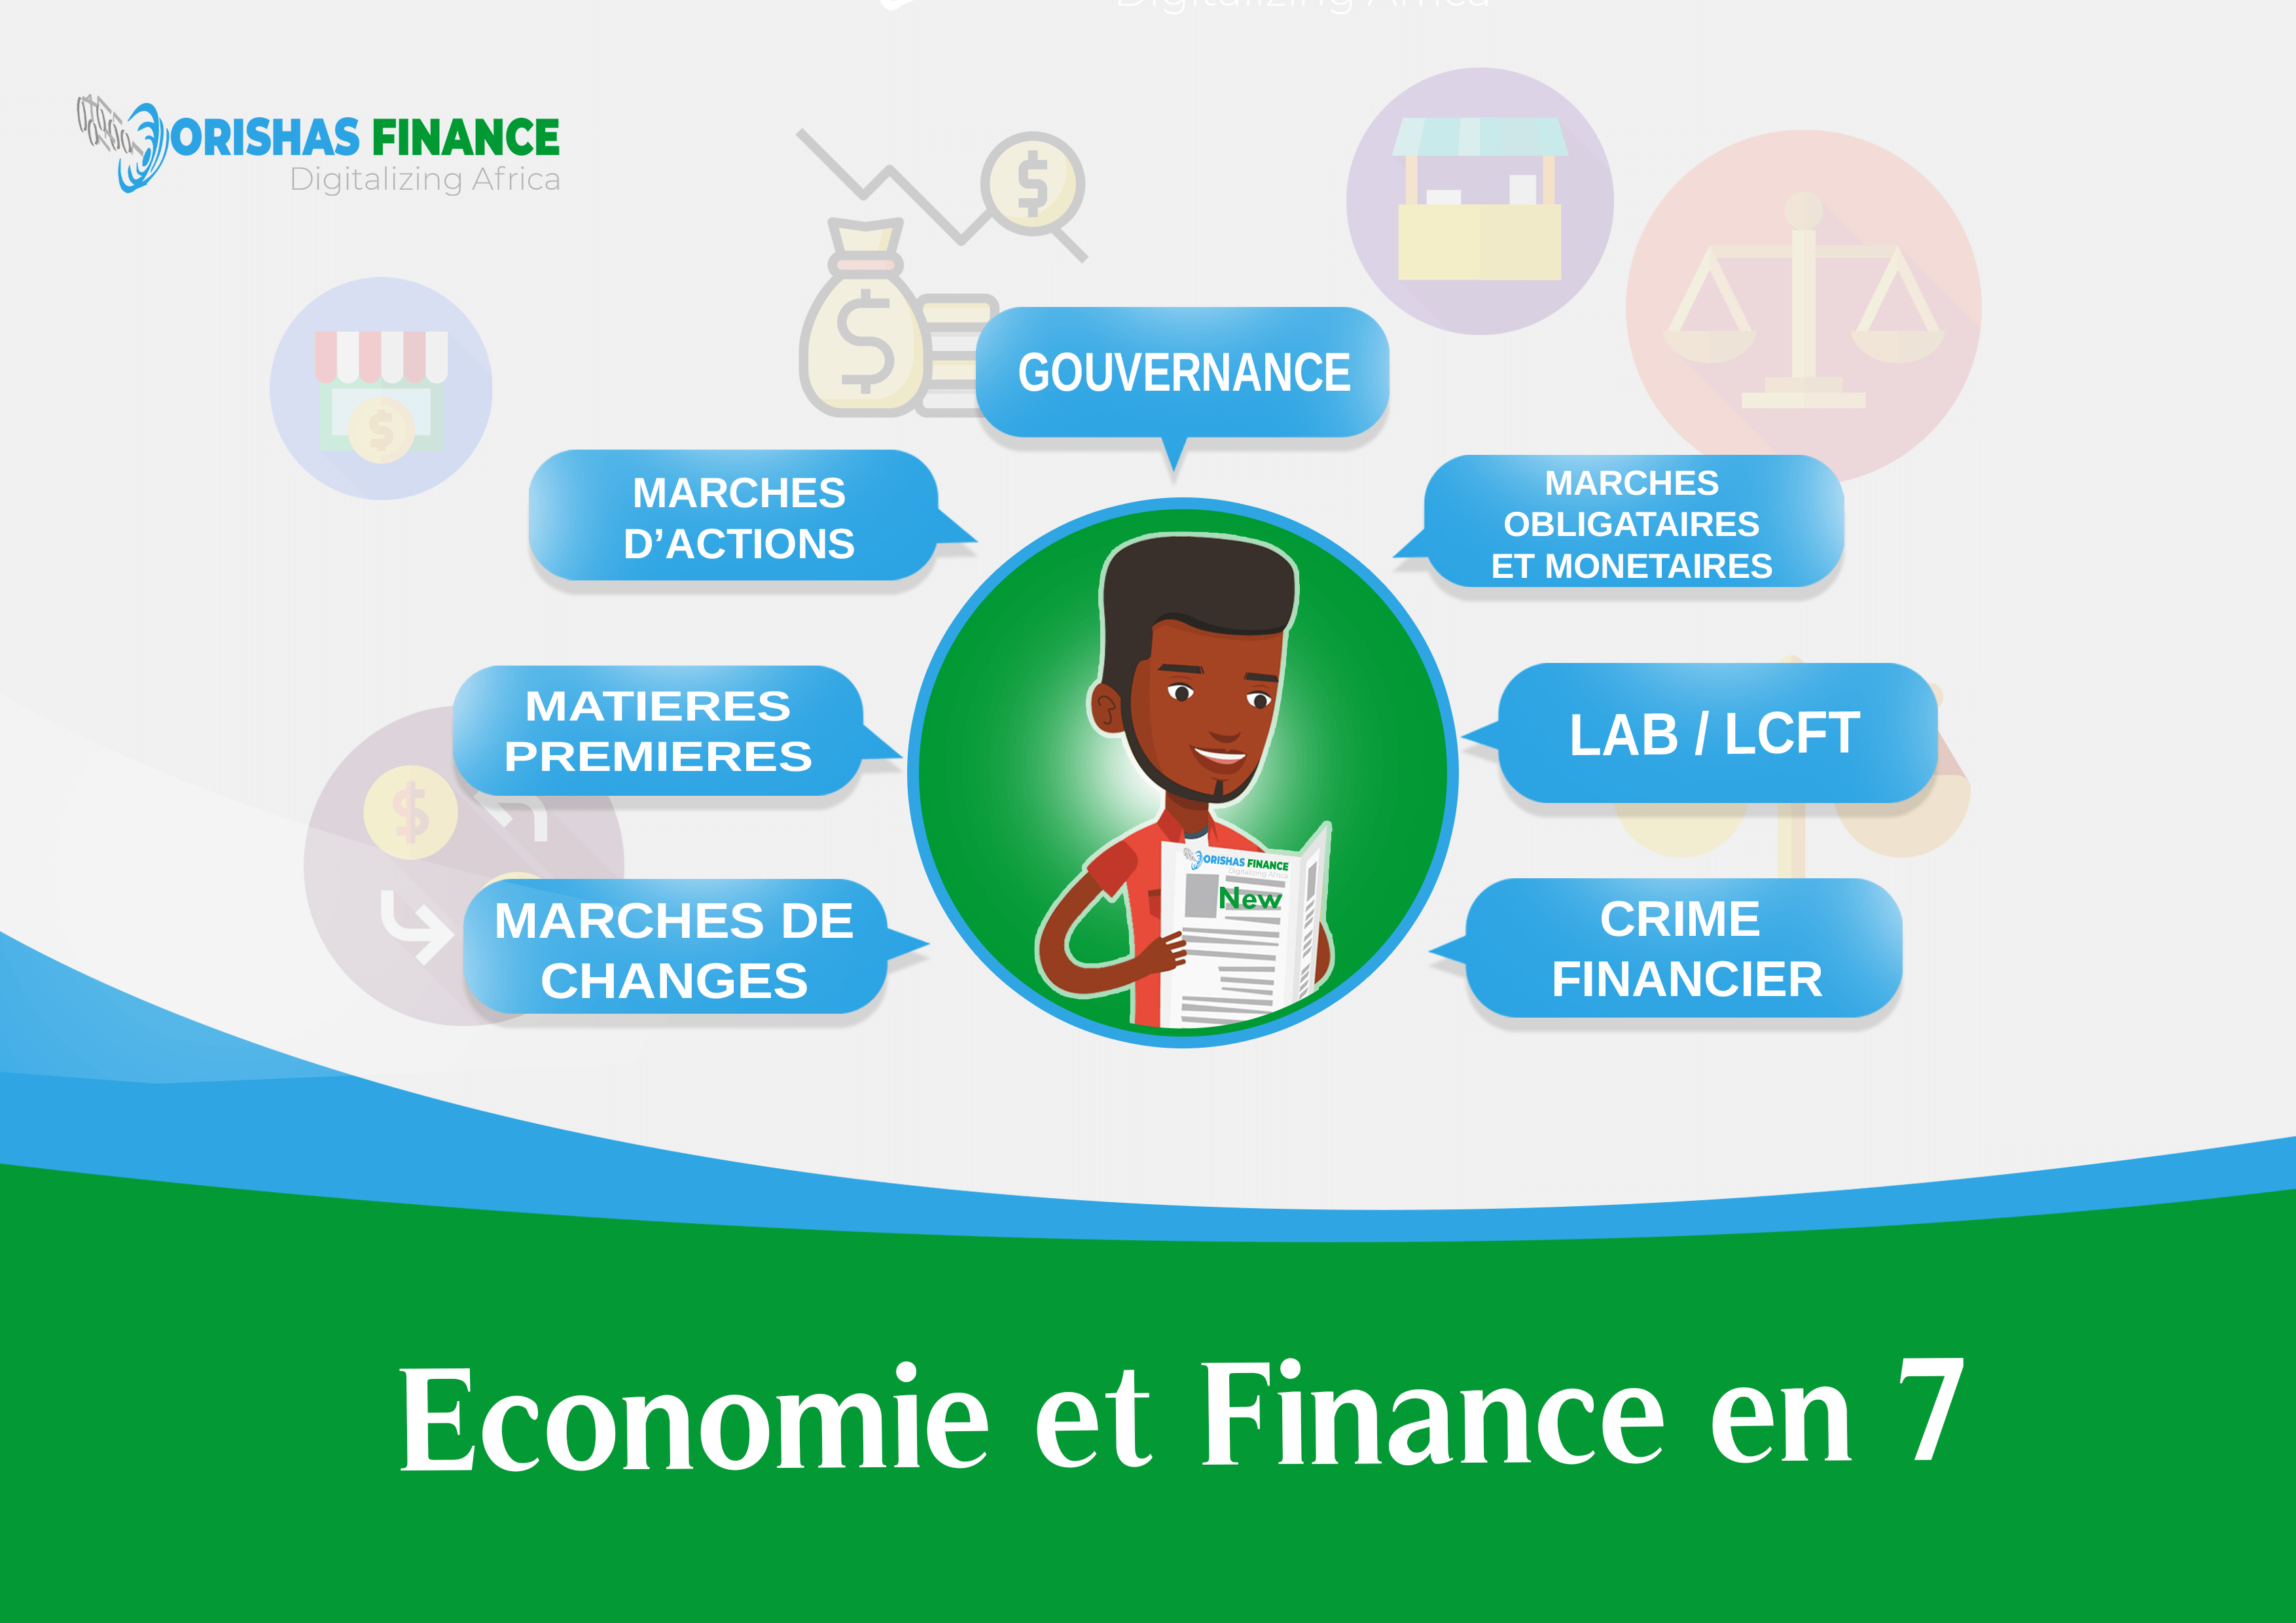  Economy and Finance in 7 from June 14 to 18, 2021 